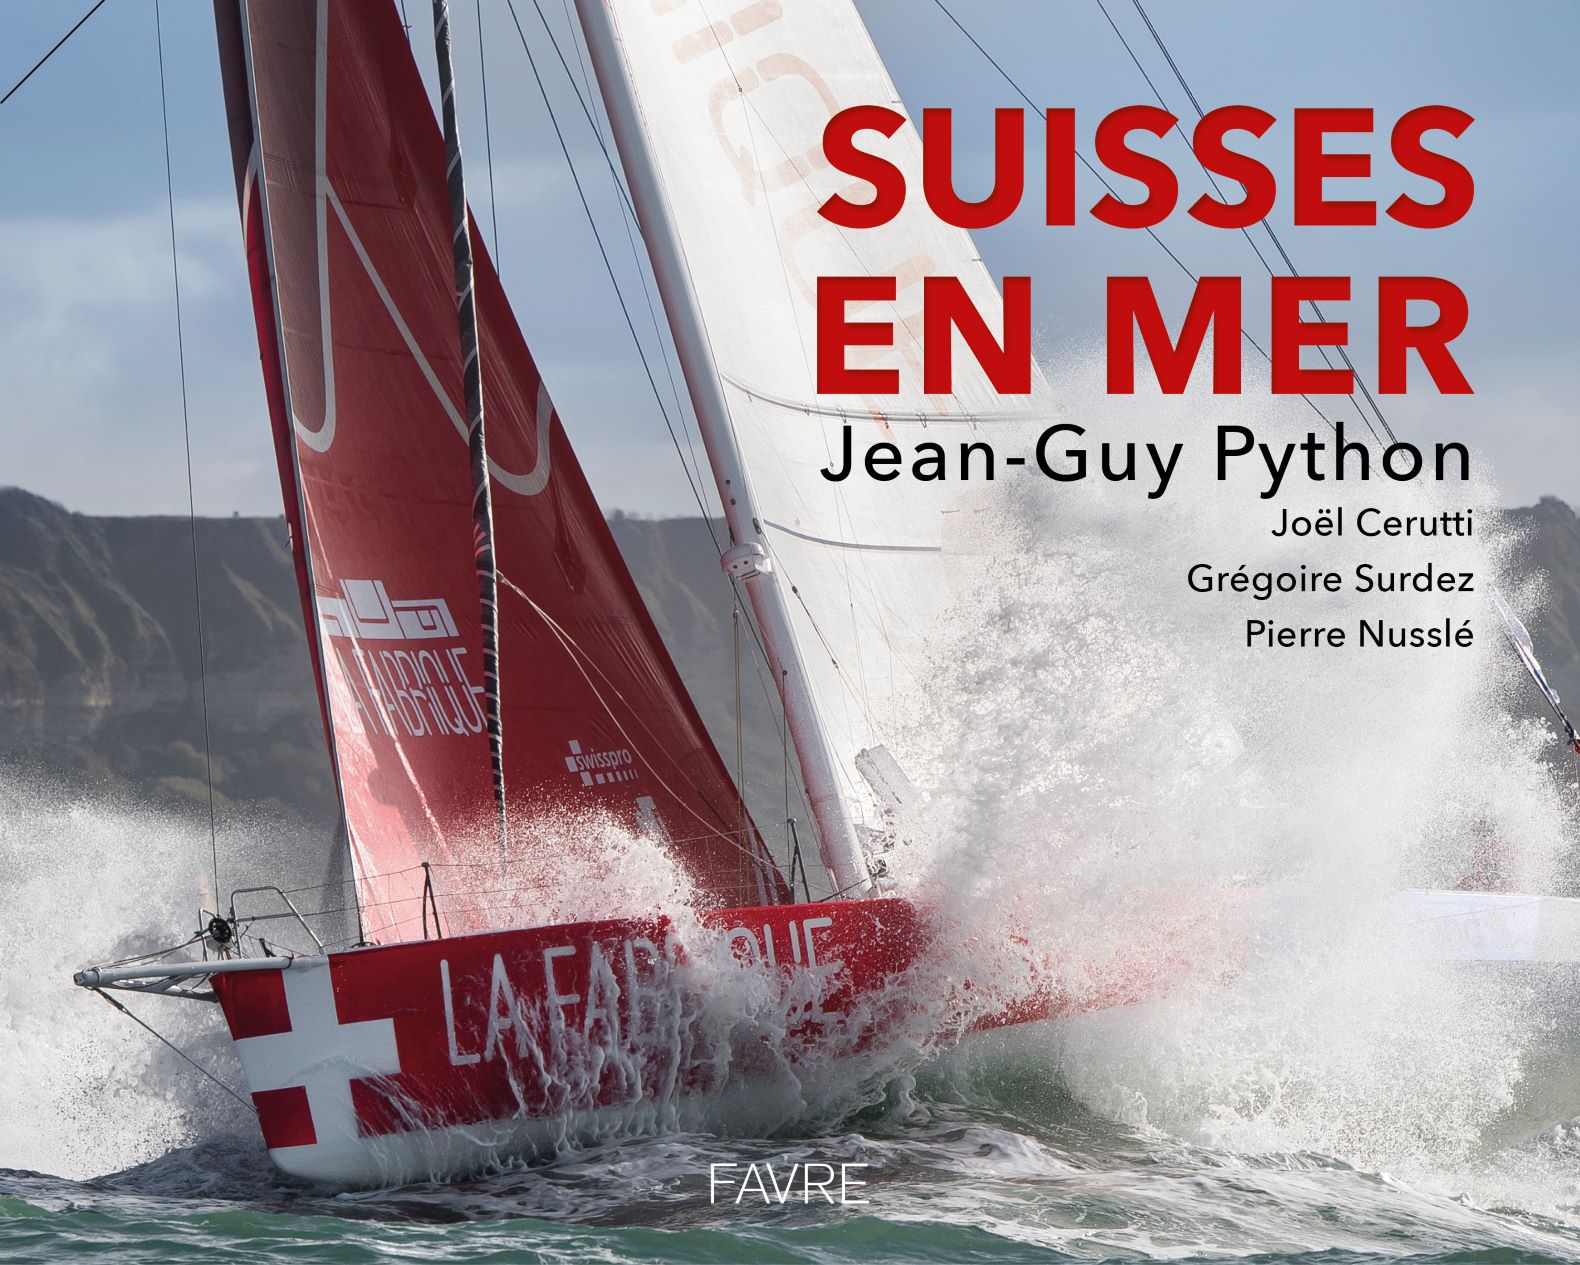 The cover of the book 'Suisses en mer'